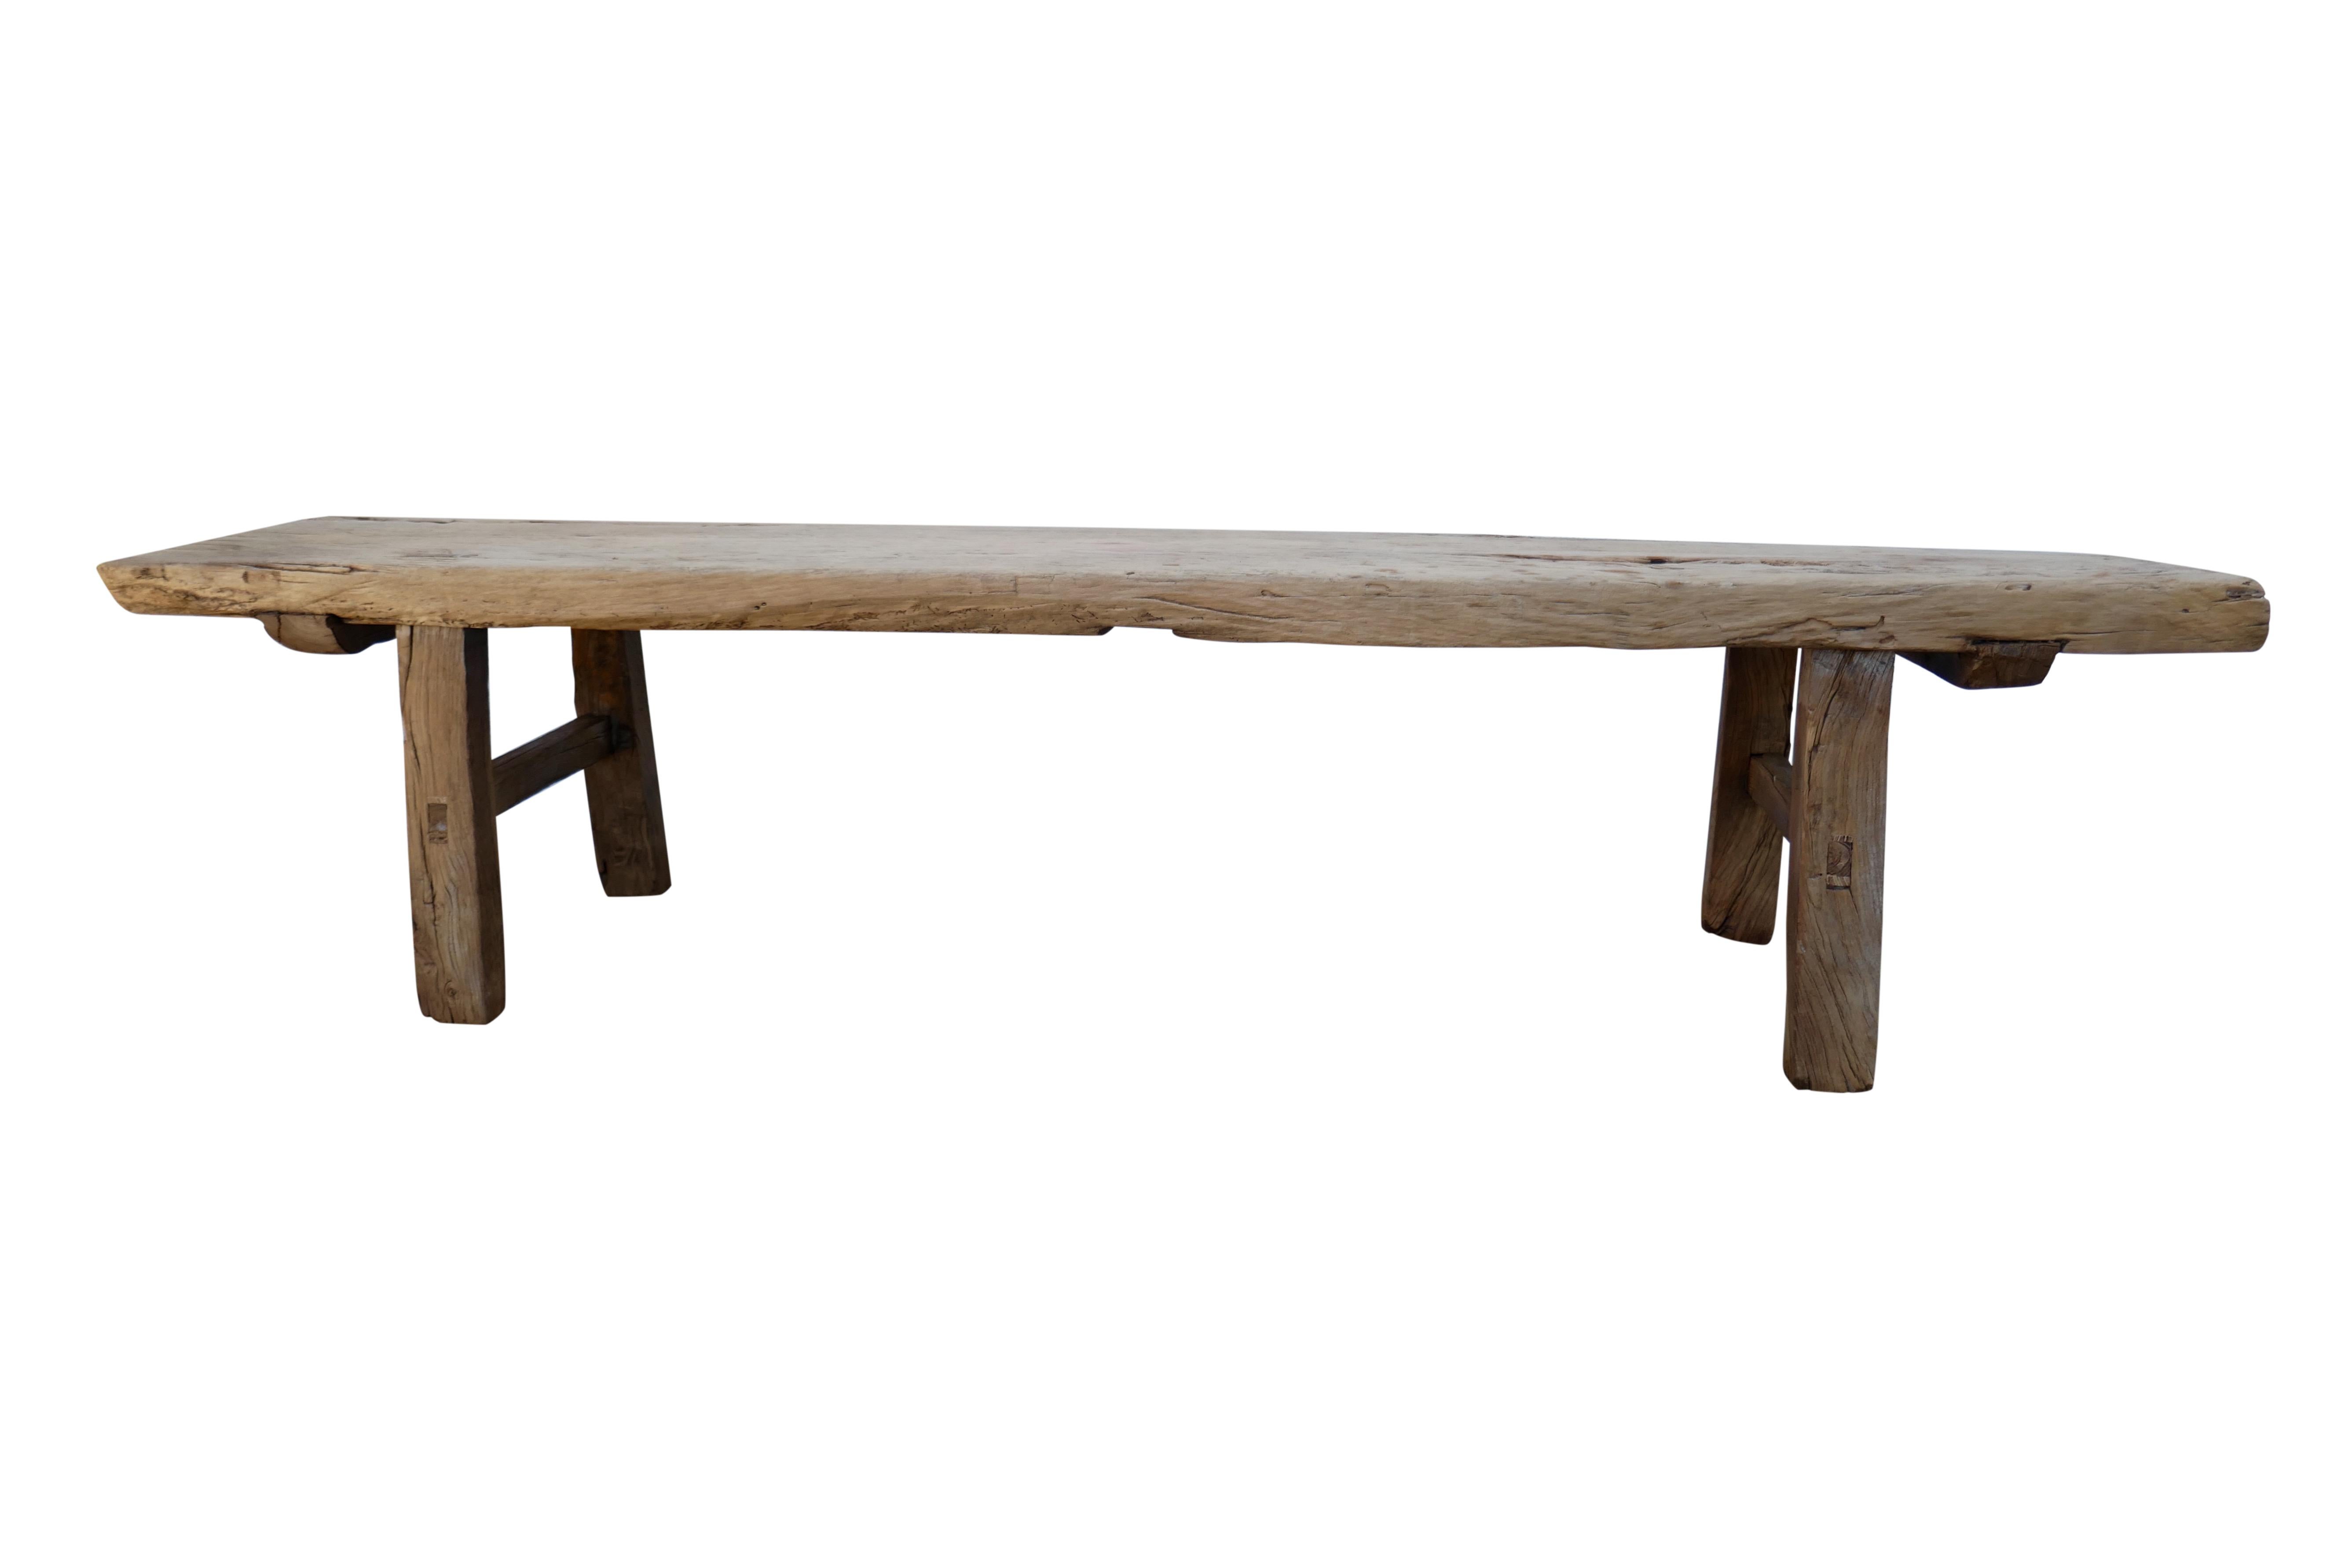 Carved Antique Elmwood Rustic Bench/Table